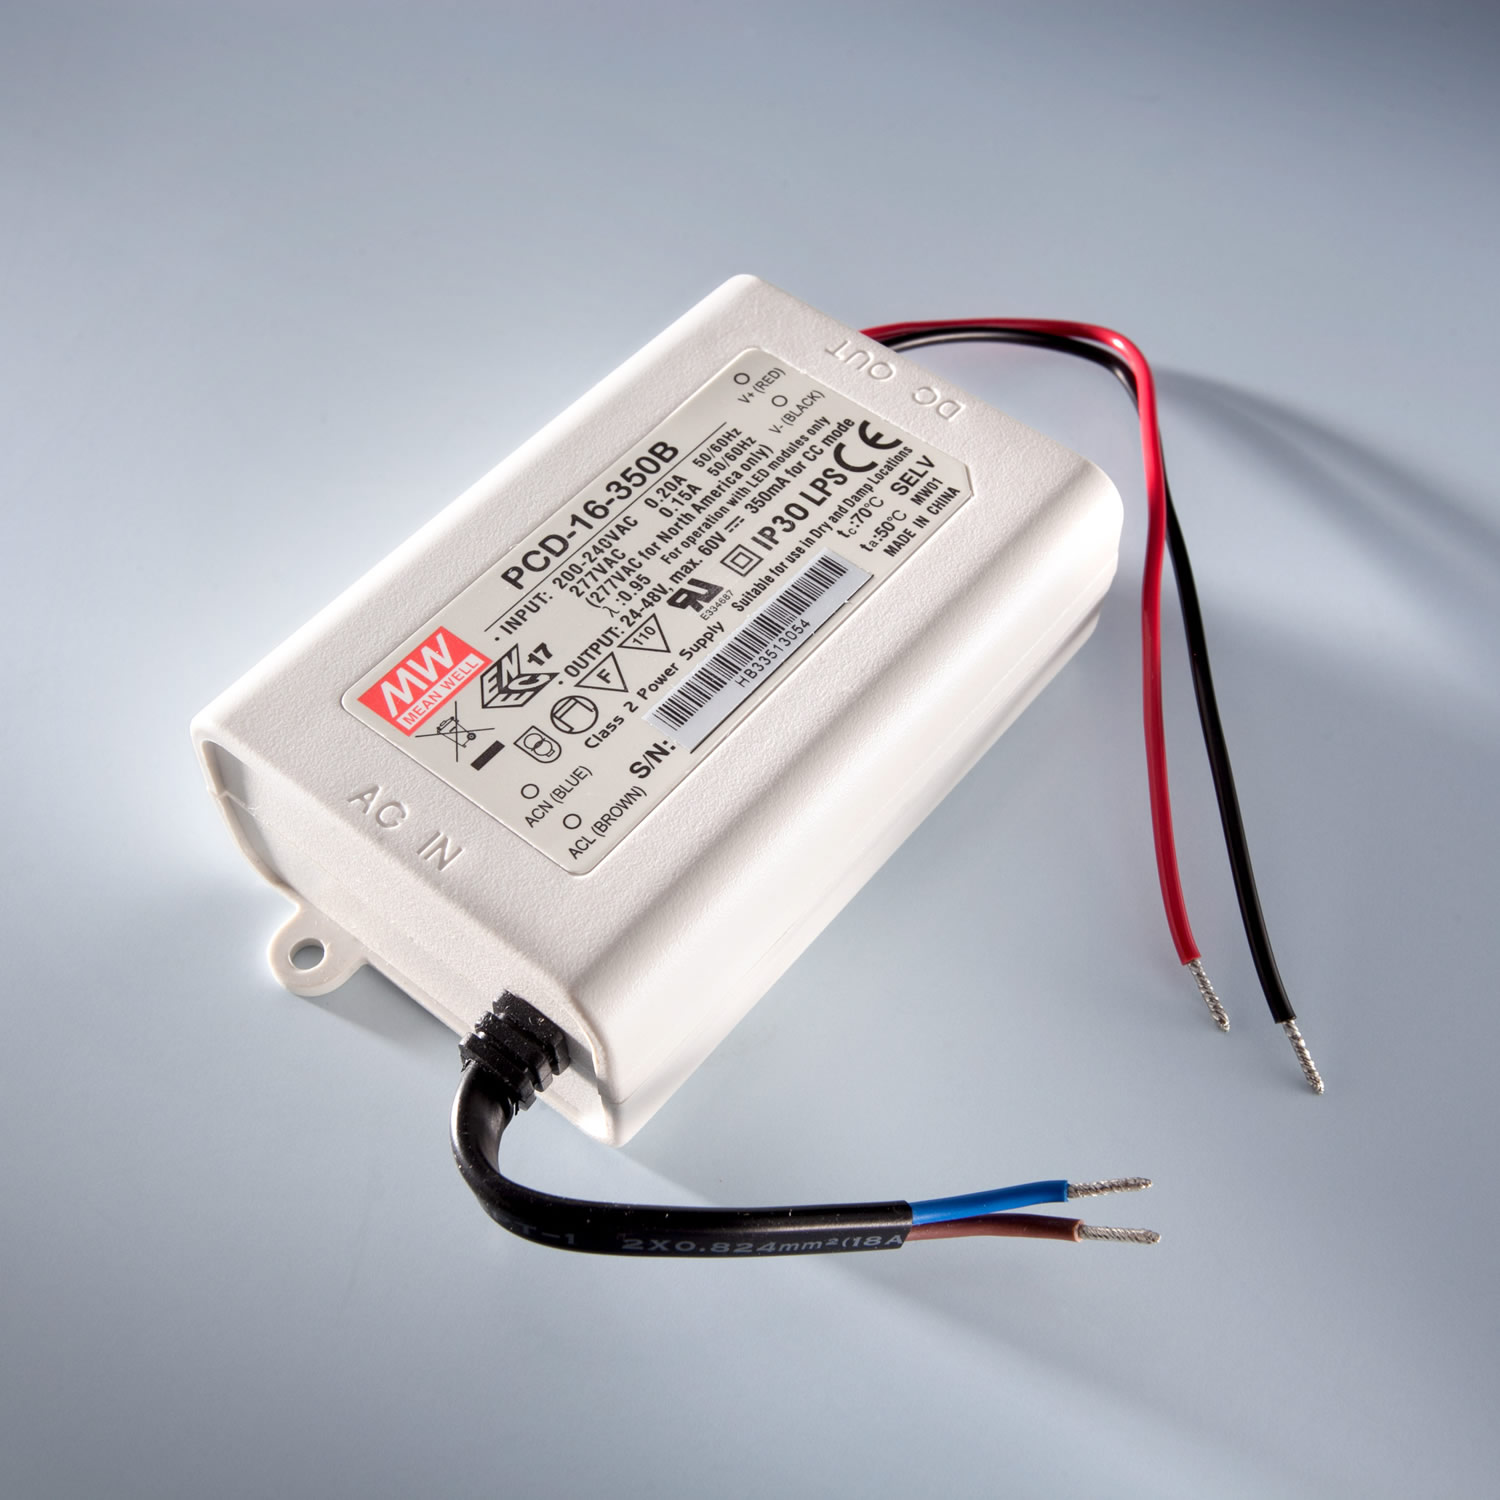 Lumistrips ES Mean Well Dimmable 230V LED Driver for Power LEDs at